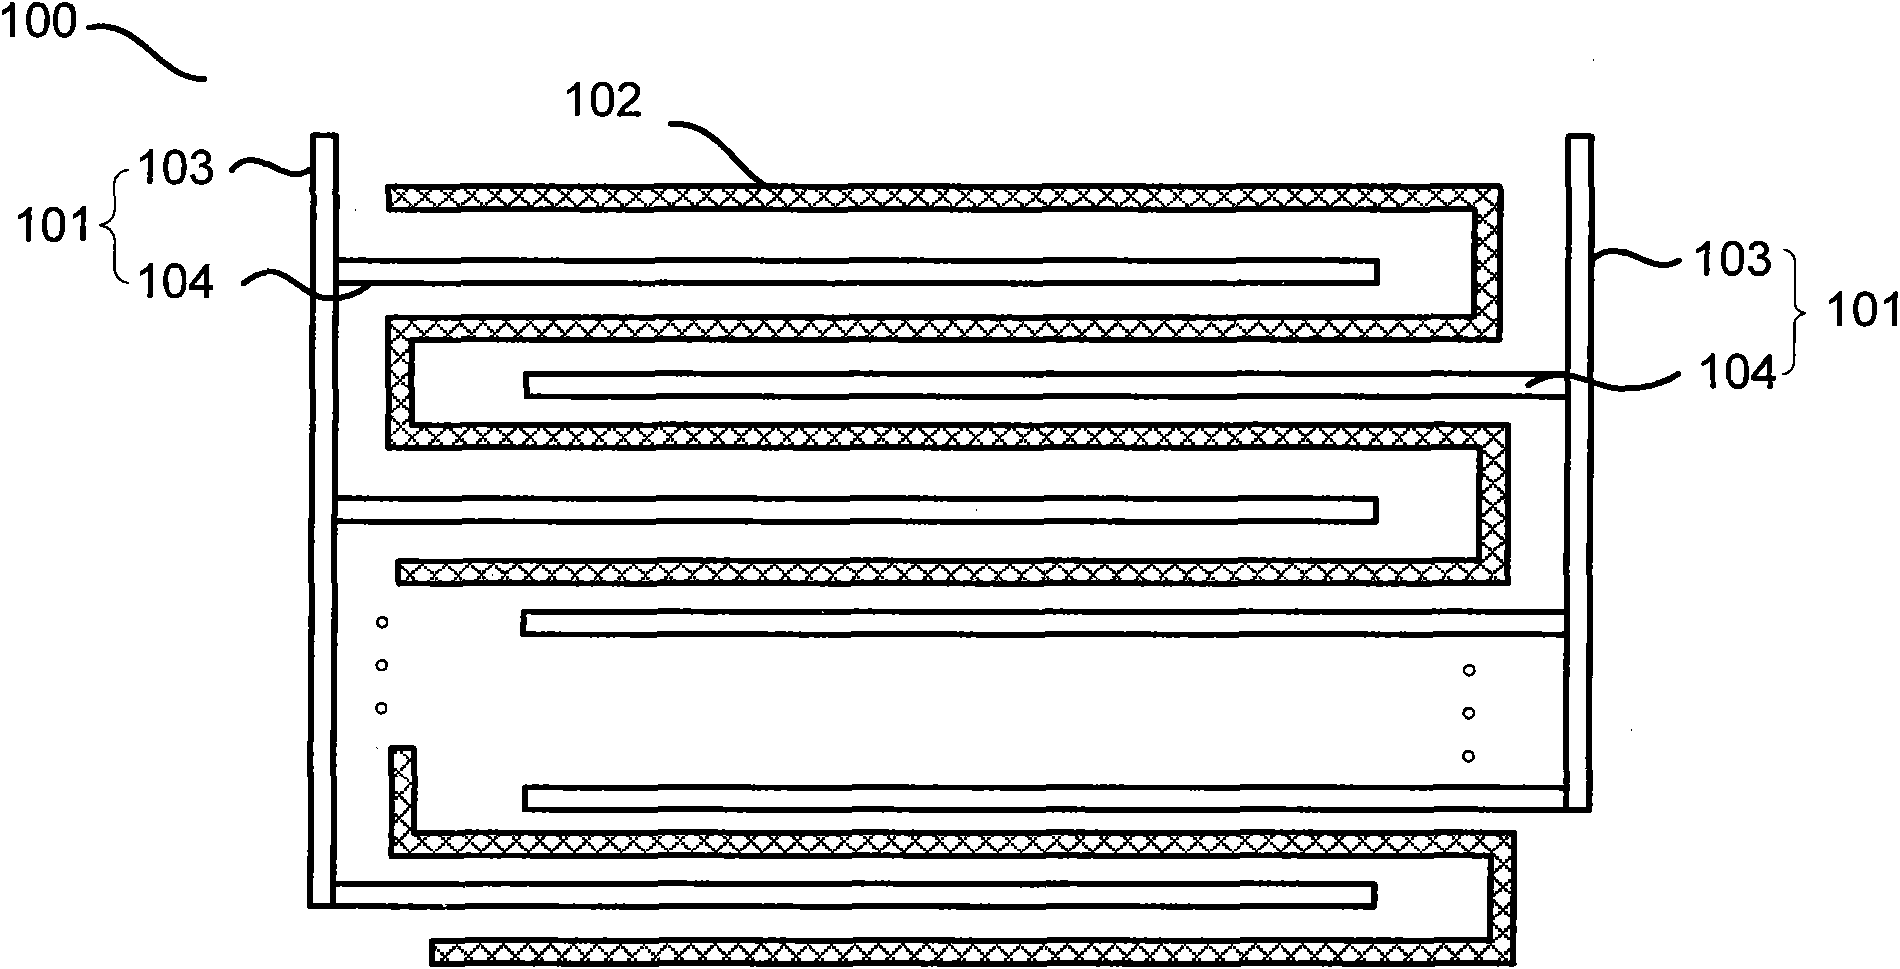 Structure of semiconductor device